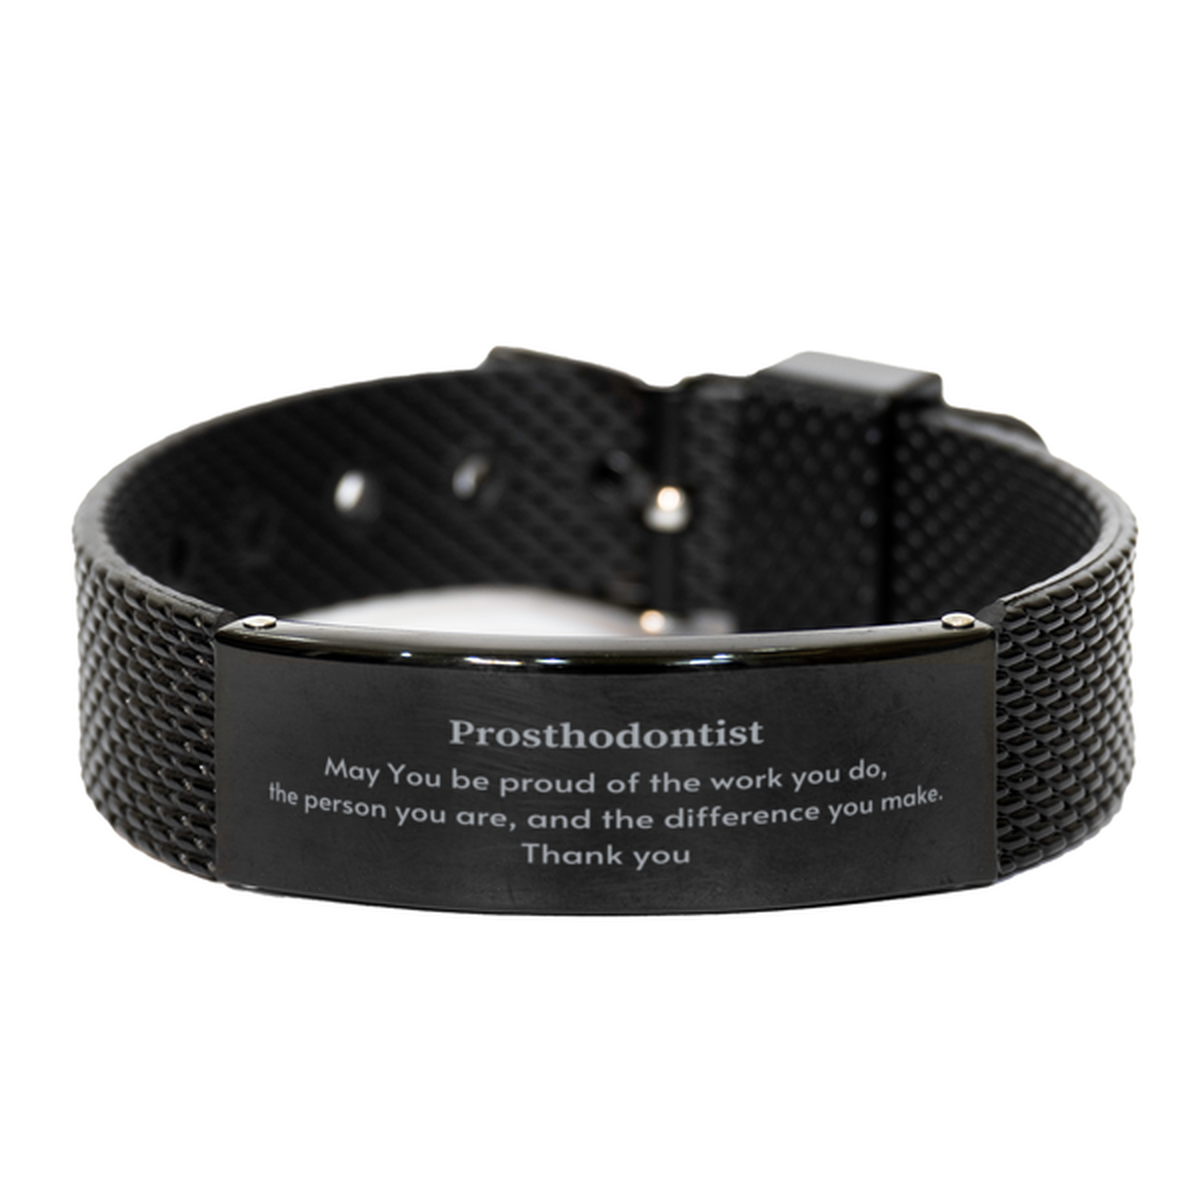 Heartwarming Black Shark Mesh Bracelet Retirement Coworkers Gifts for Prosthodontist, Prosthodontist May You be proud of the work you do, the person you are Gifts for Boss Men Women Friends